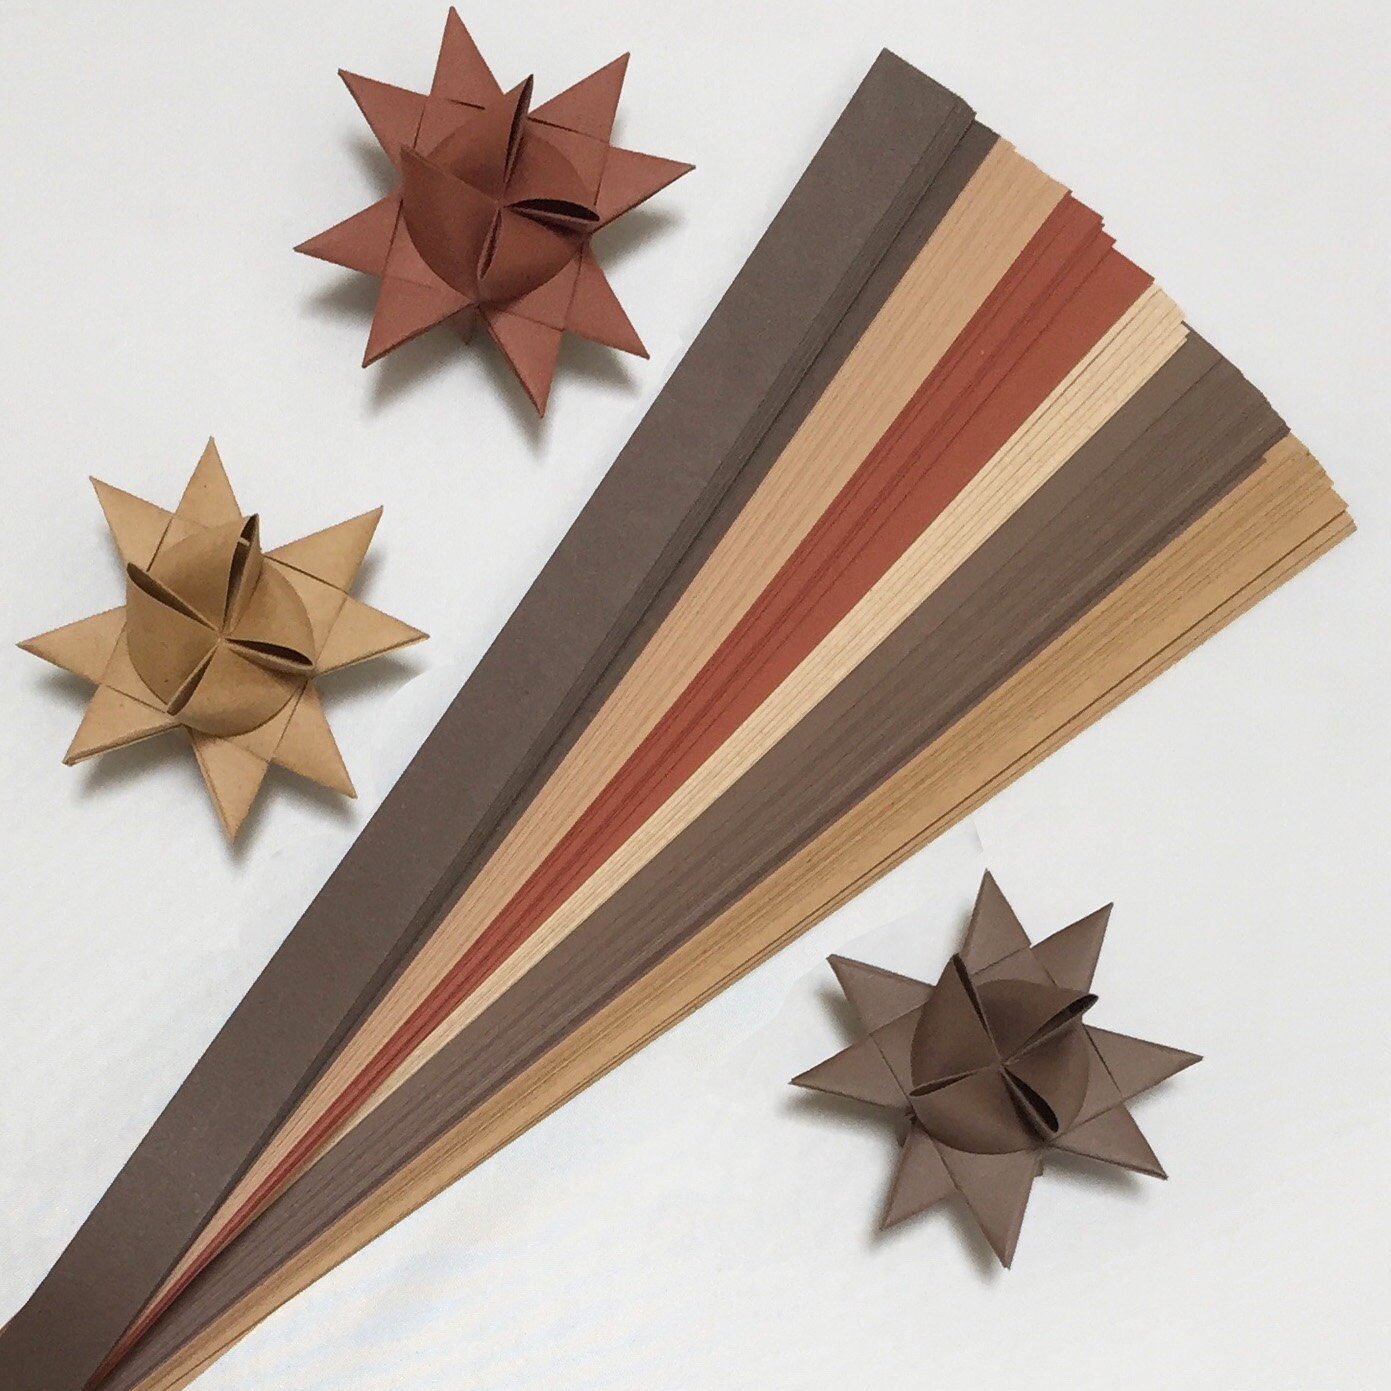  Metallic and Pearlescent Paper Strips for Weaving Projects  (Variety Color Packs). Paper Strips for Moravian Stars, German Stars and  Froebel Stars. 100 strips per pack. (1 inch, Metallic Mix) : Handmade  Products